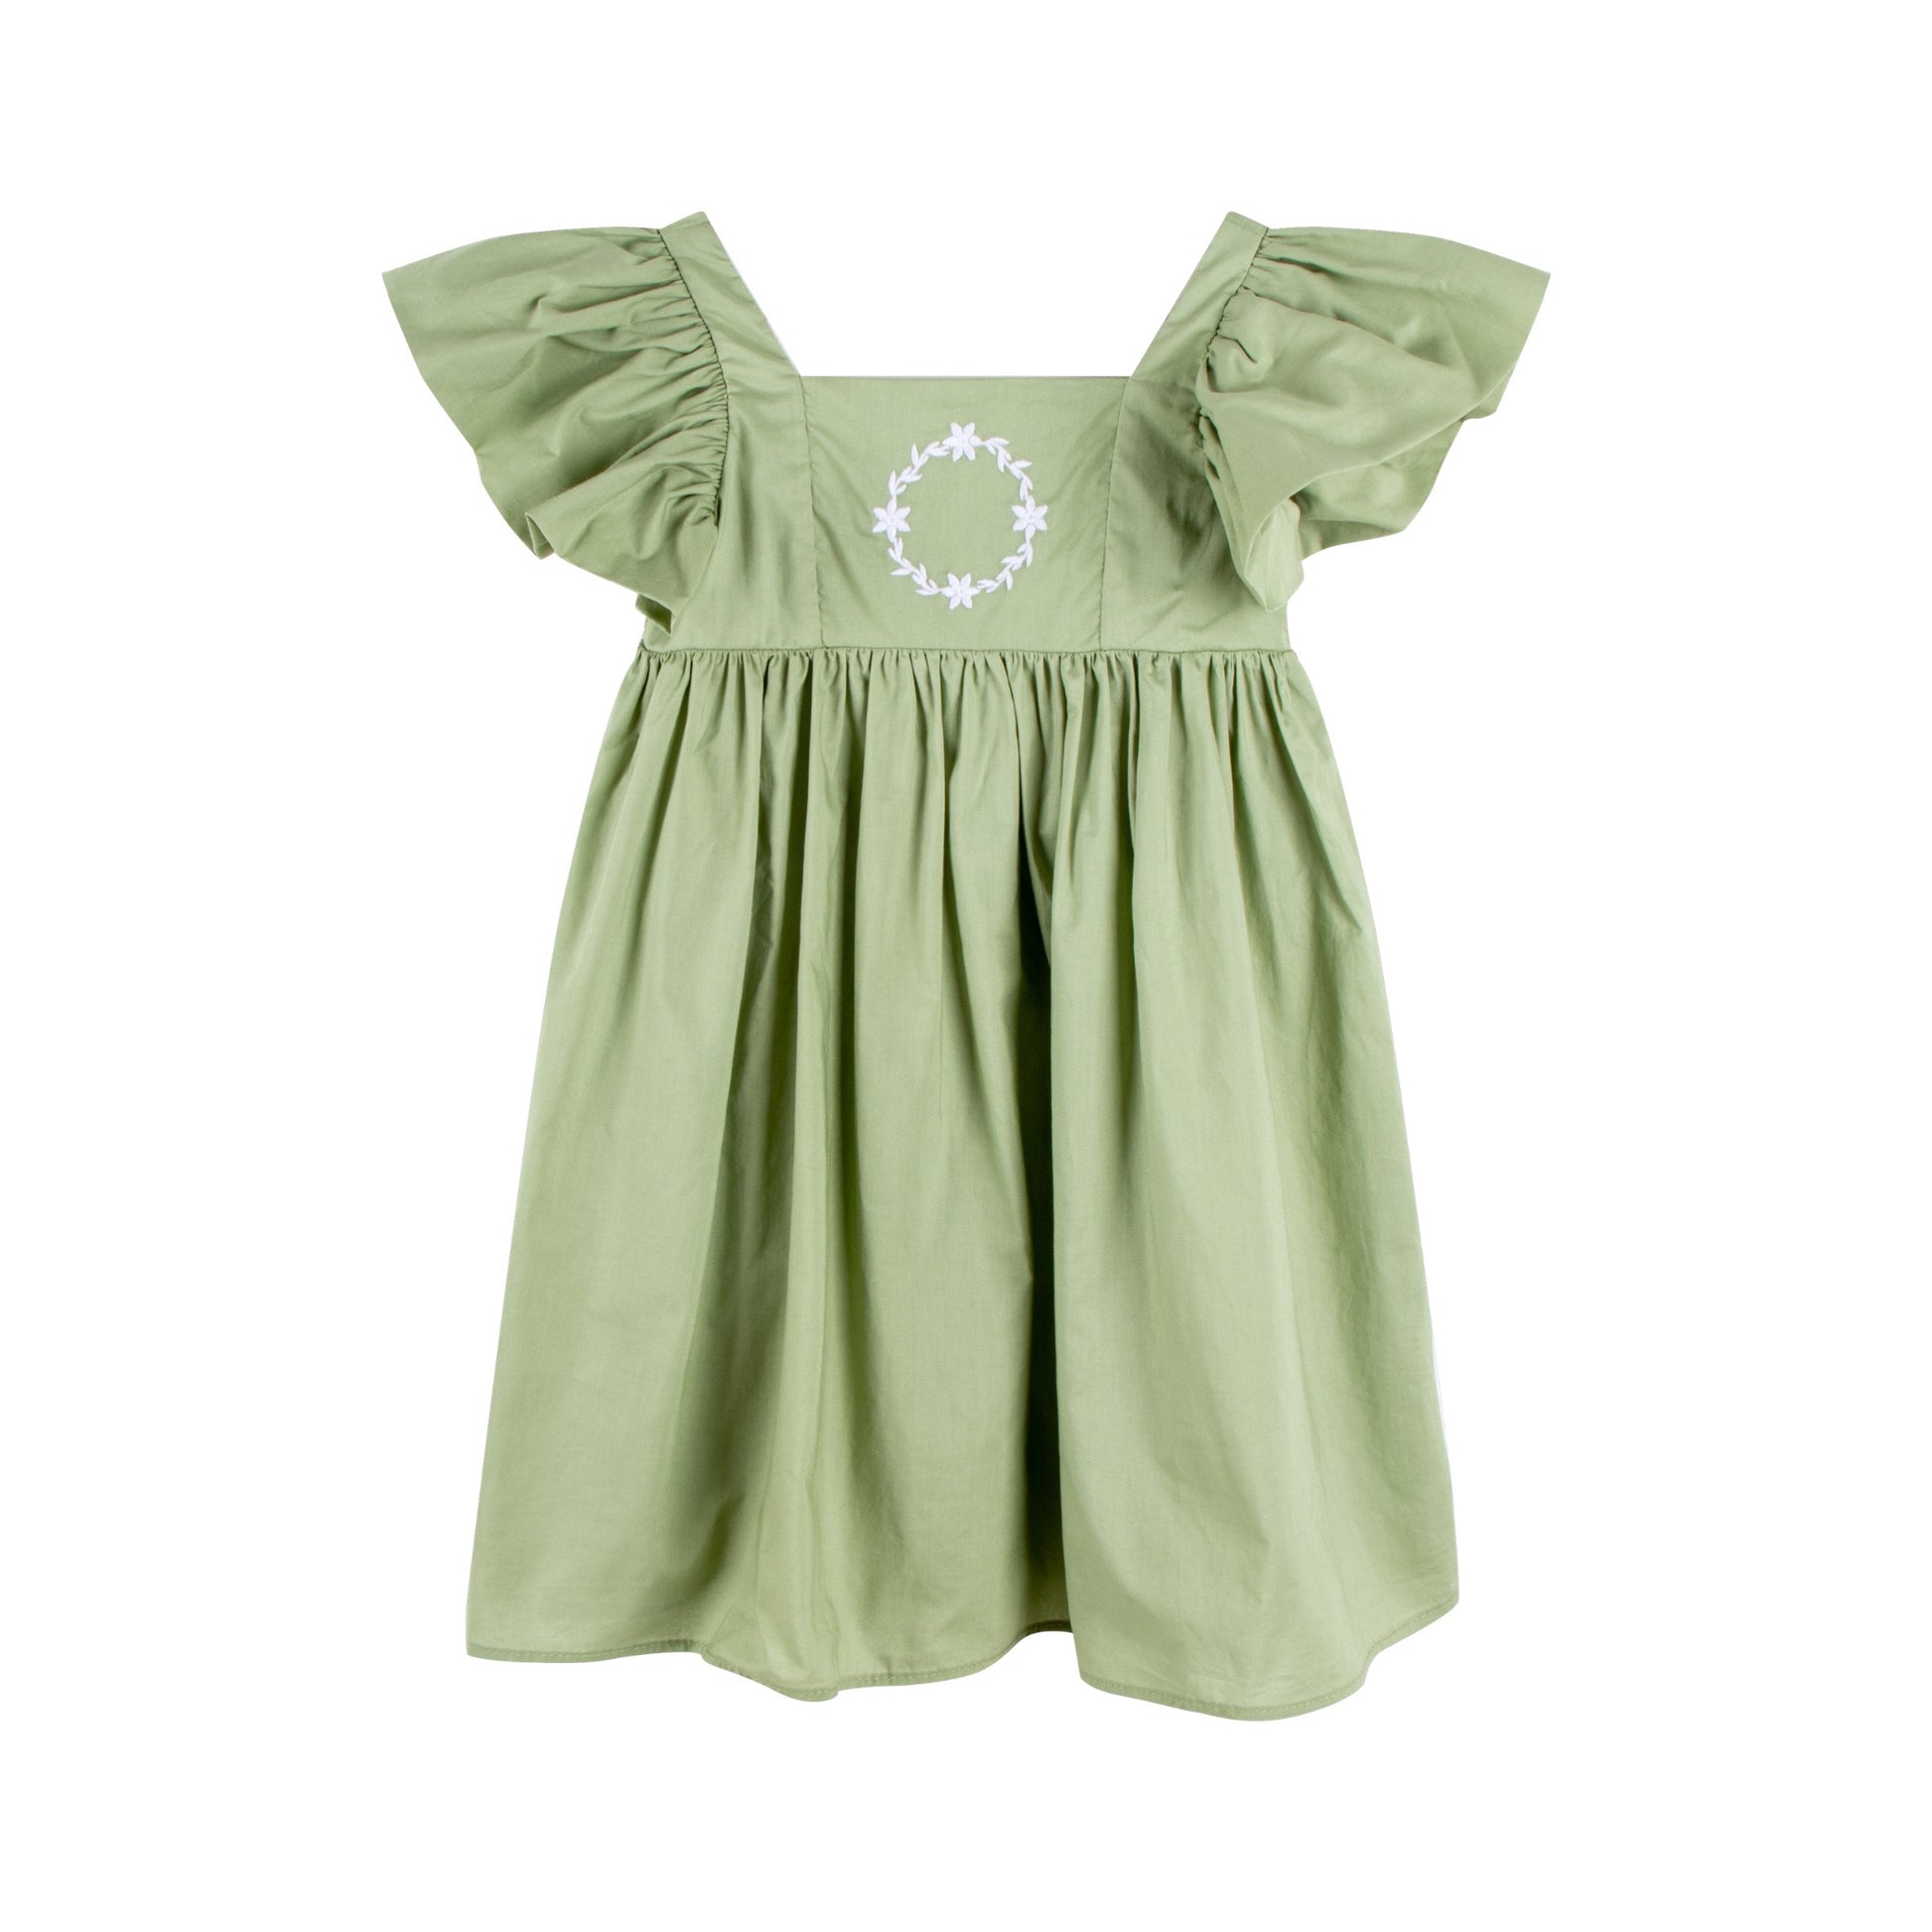 iMiN Kids Mini Me Girls Ruffles Sleeves Floral Embroidered Dress Sage